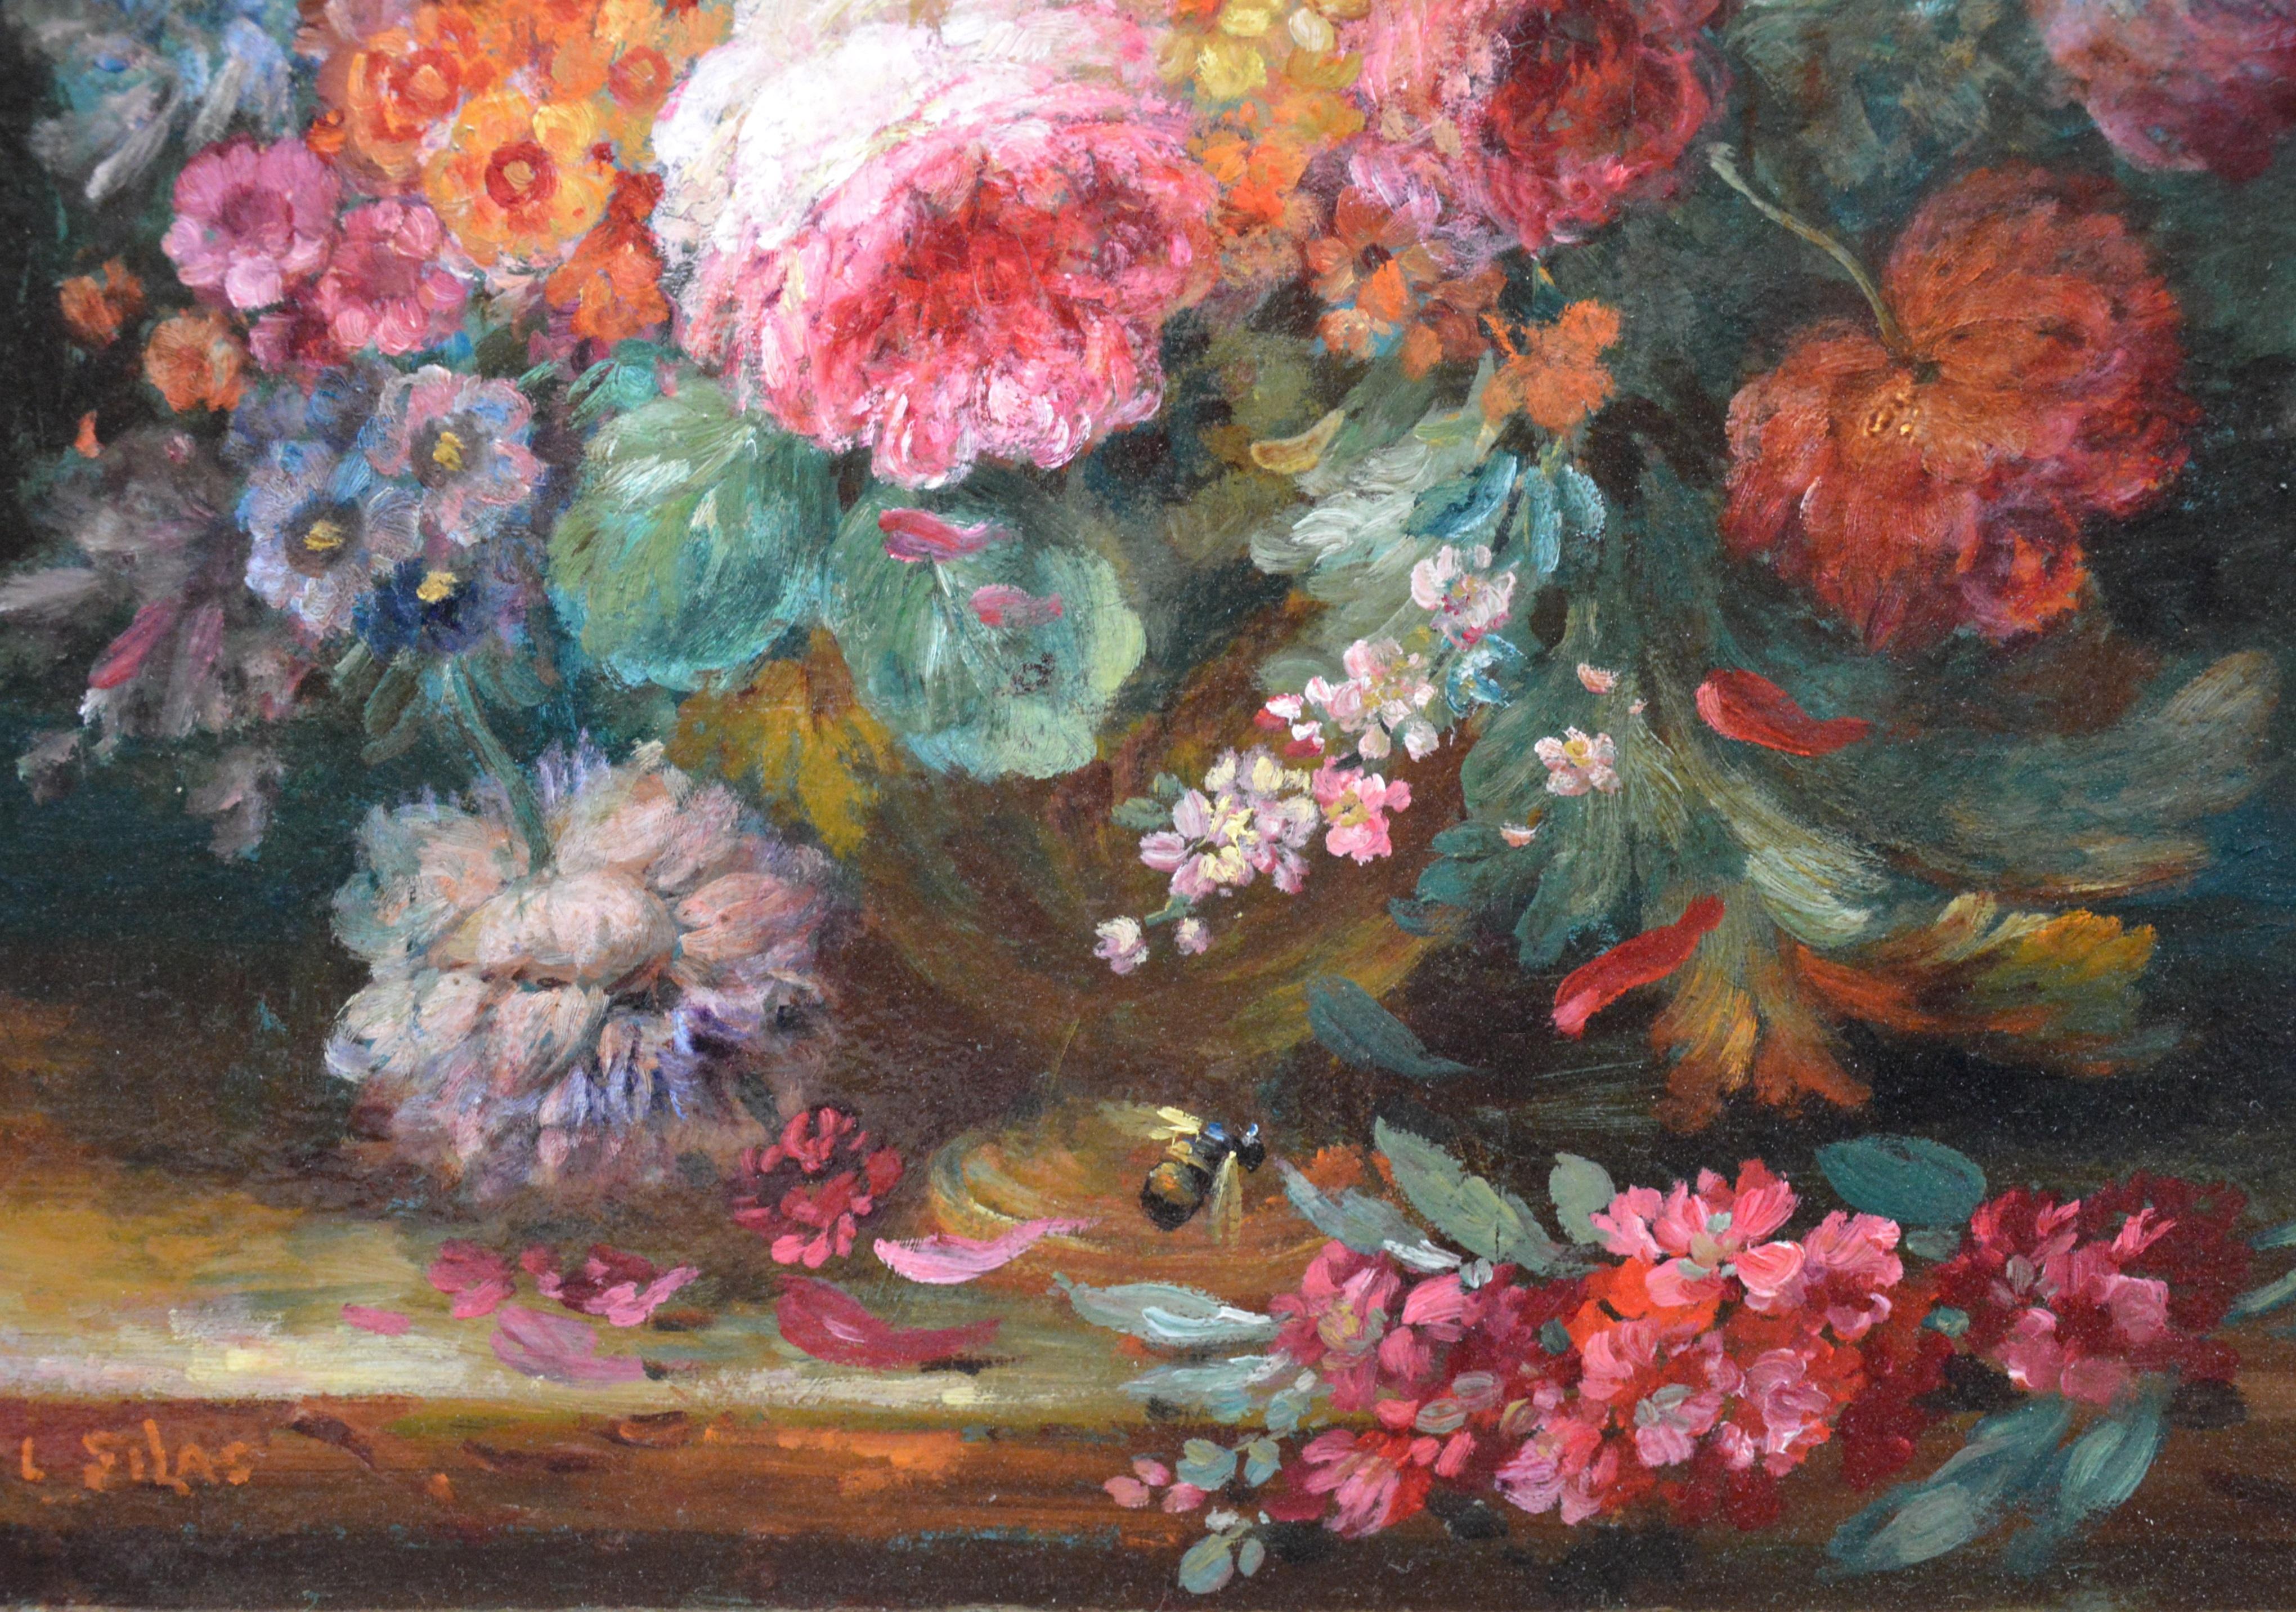 ‘A Summer Arrangement’ by Louis Silas (1860-1937). The painting is signed by the artist and hands in a fine quality gold metal leaf frame. 

As with all of the original antique oil paintings we sell it is offered in excellent condition, having just